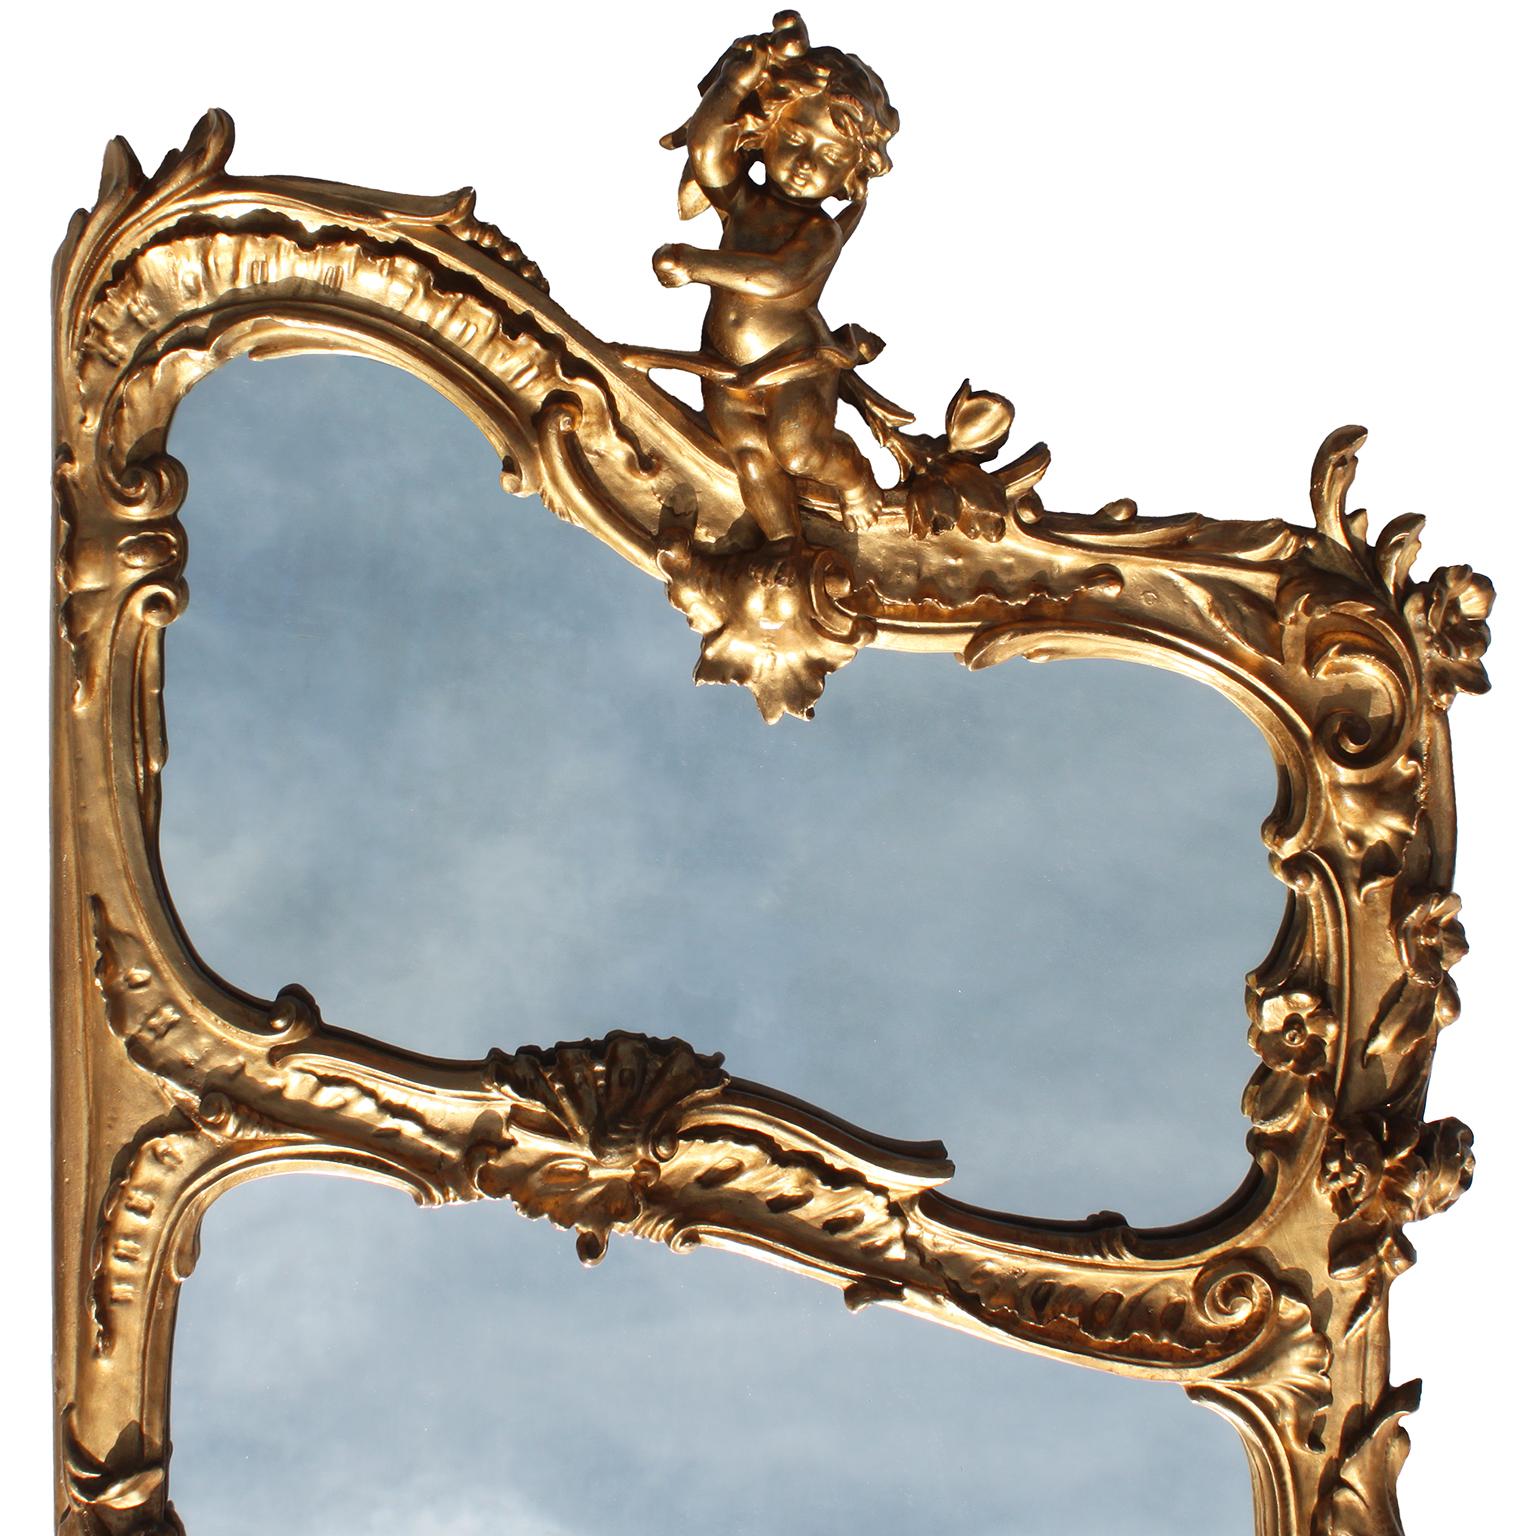 Whimsical French 19th-20th Century Belle Époque Gilt-Wood Triptych Putti Mirrors For Sale 1